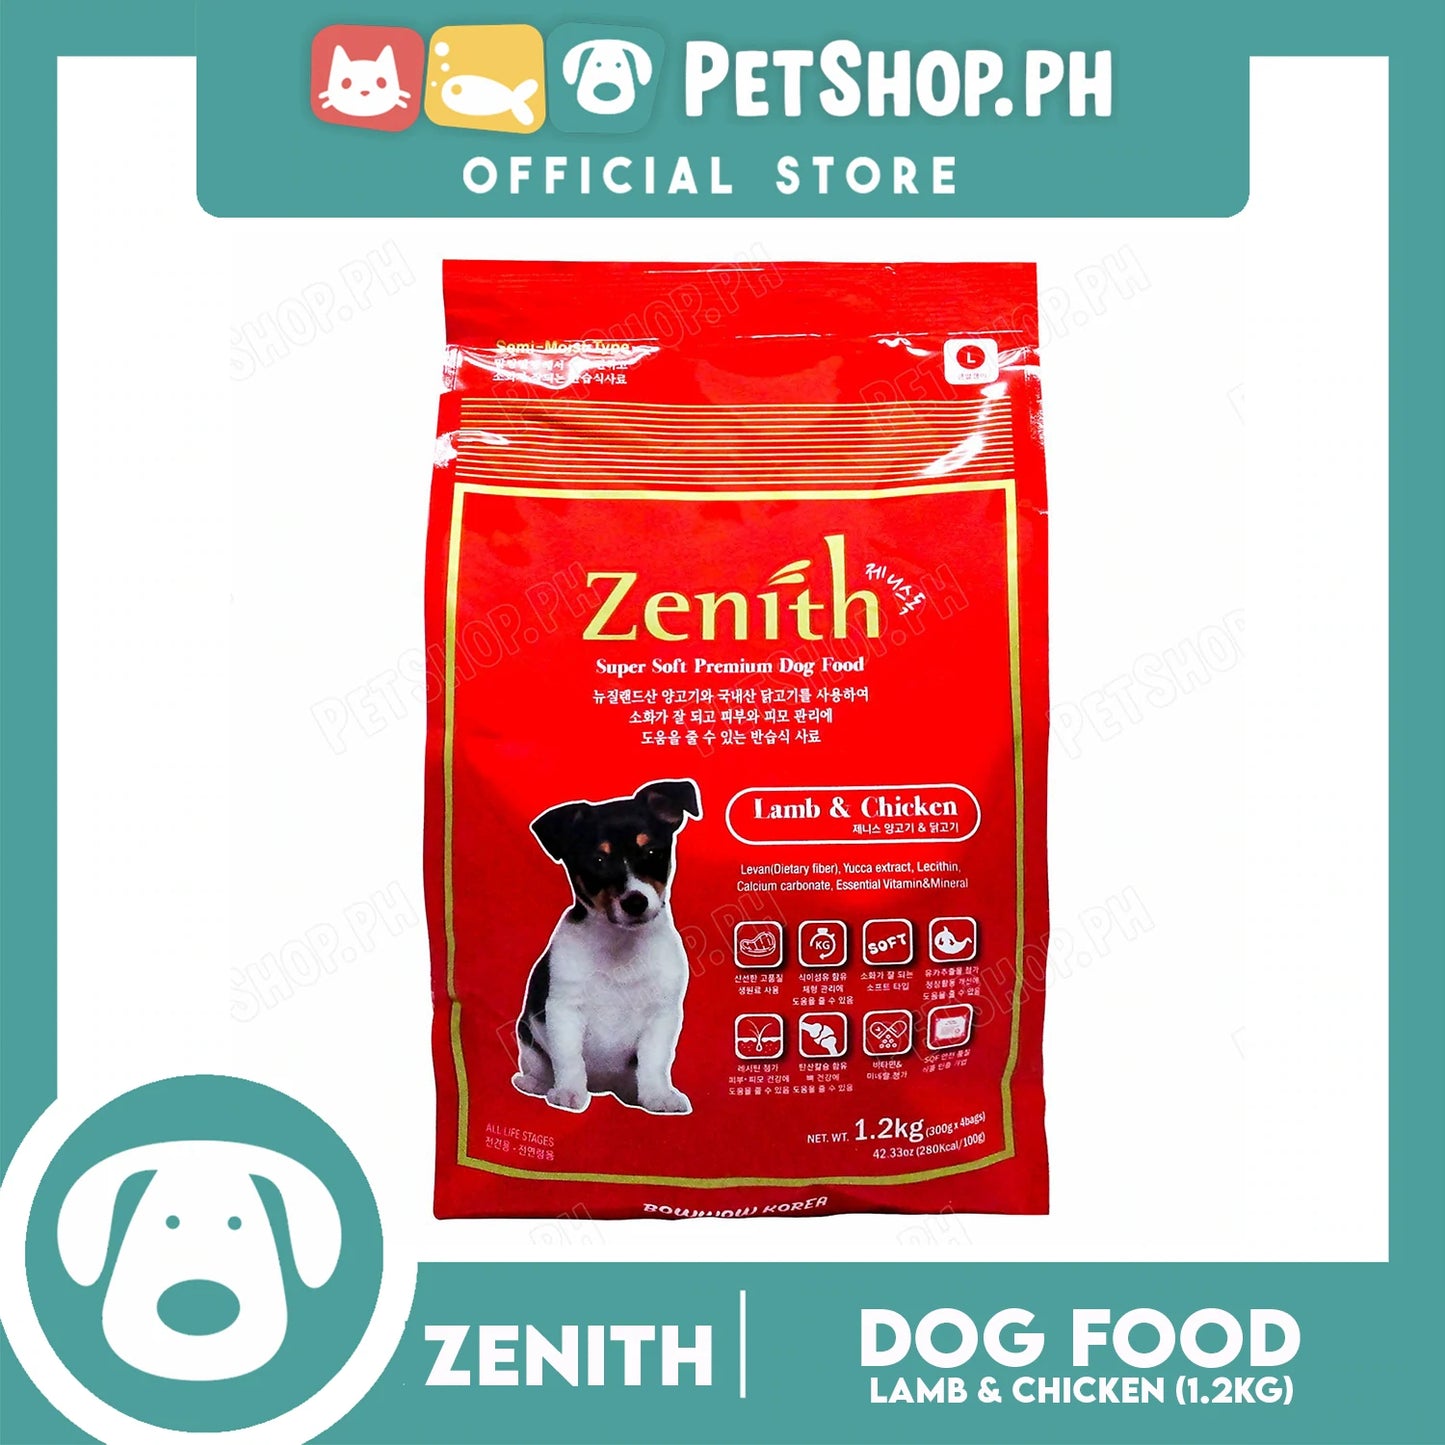 Zenith Super Soft Premium Dog Food For Dogs Large Breeds And All Life Stages 1.2kg (Lamb, Chicken) Red Z999 Dog Dry Food